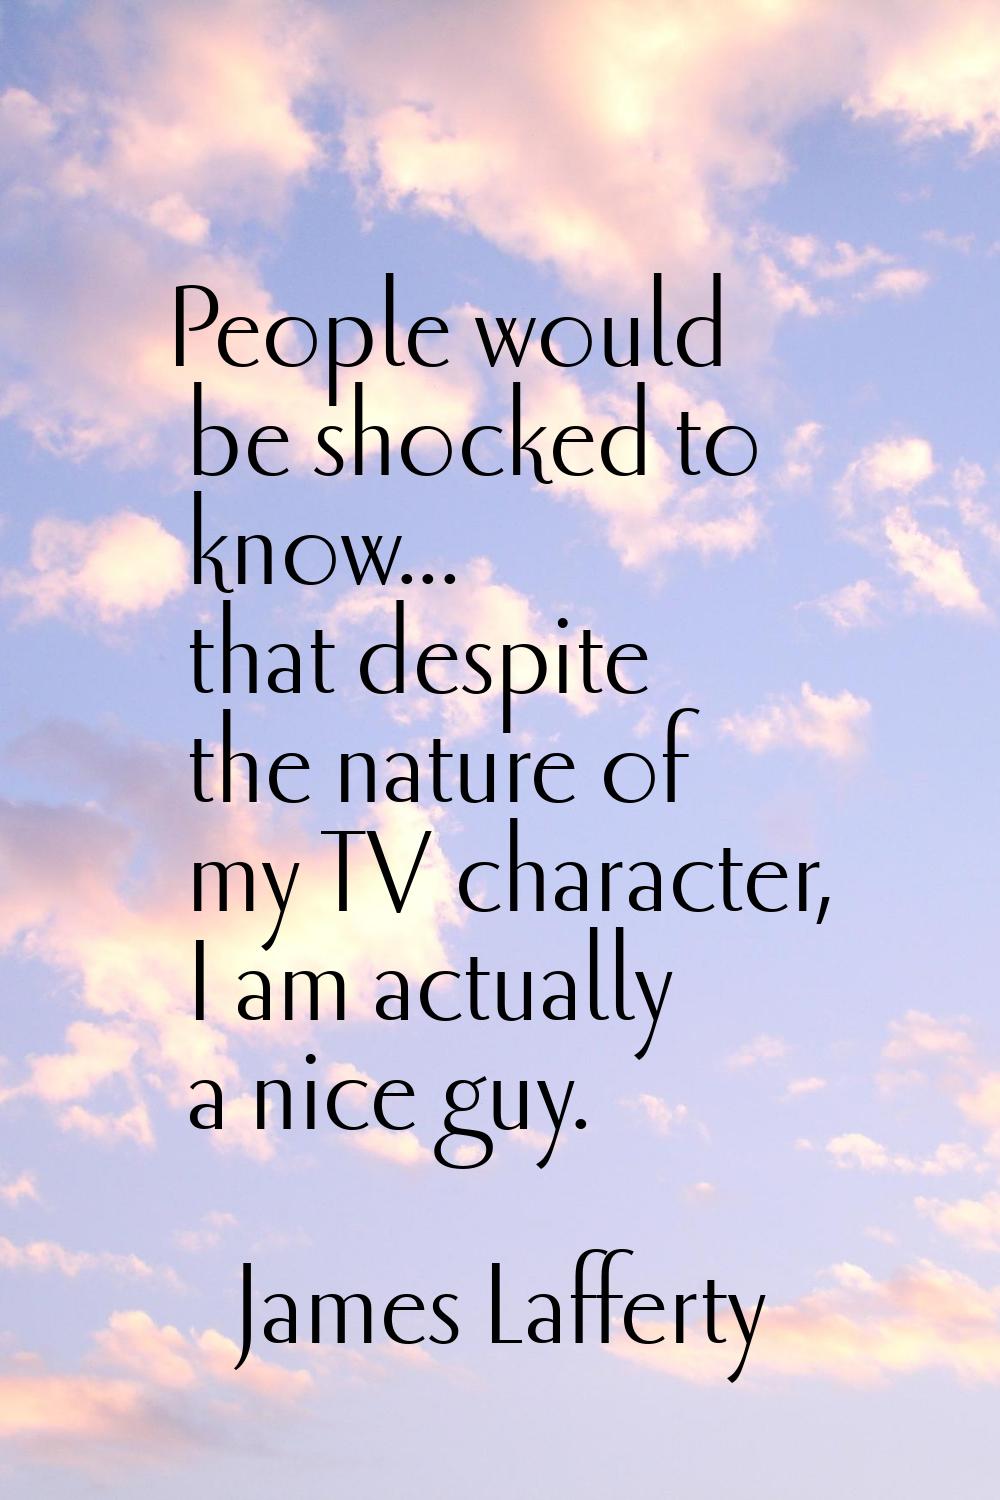 People would be shocked to know... that despite the nature of my TV character, I am actually a nice